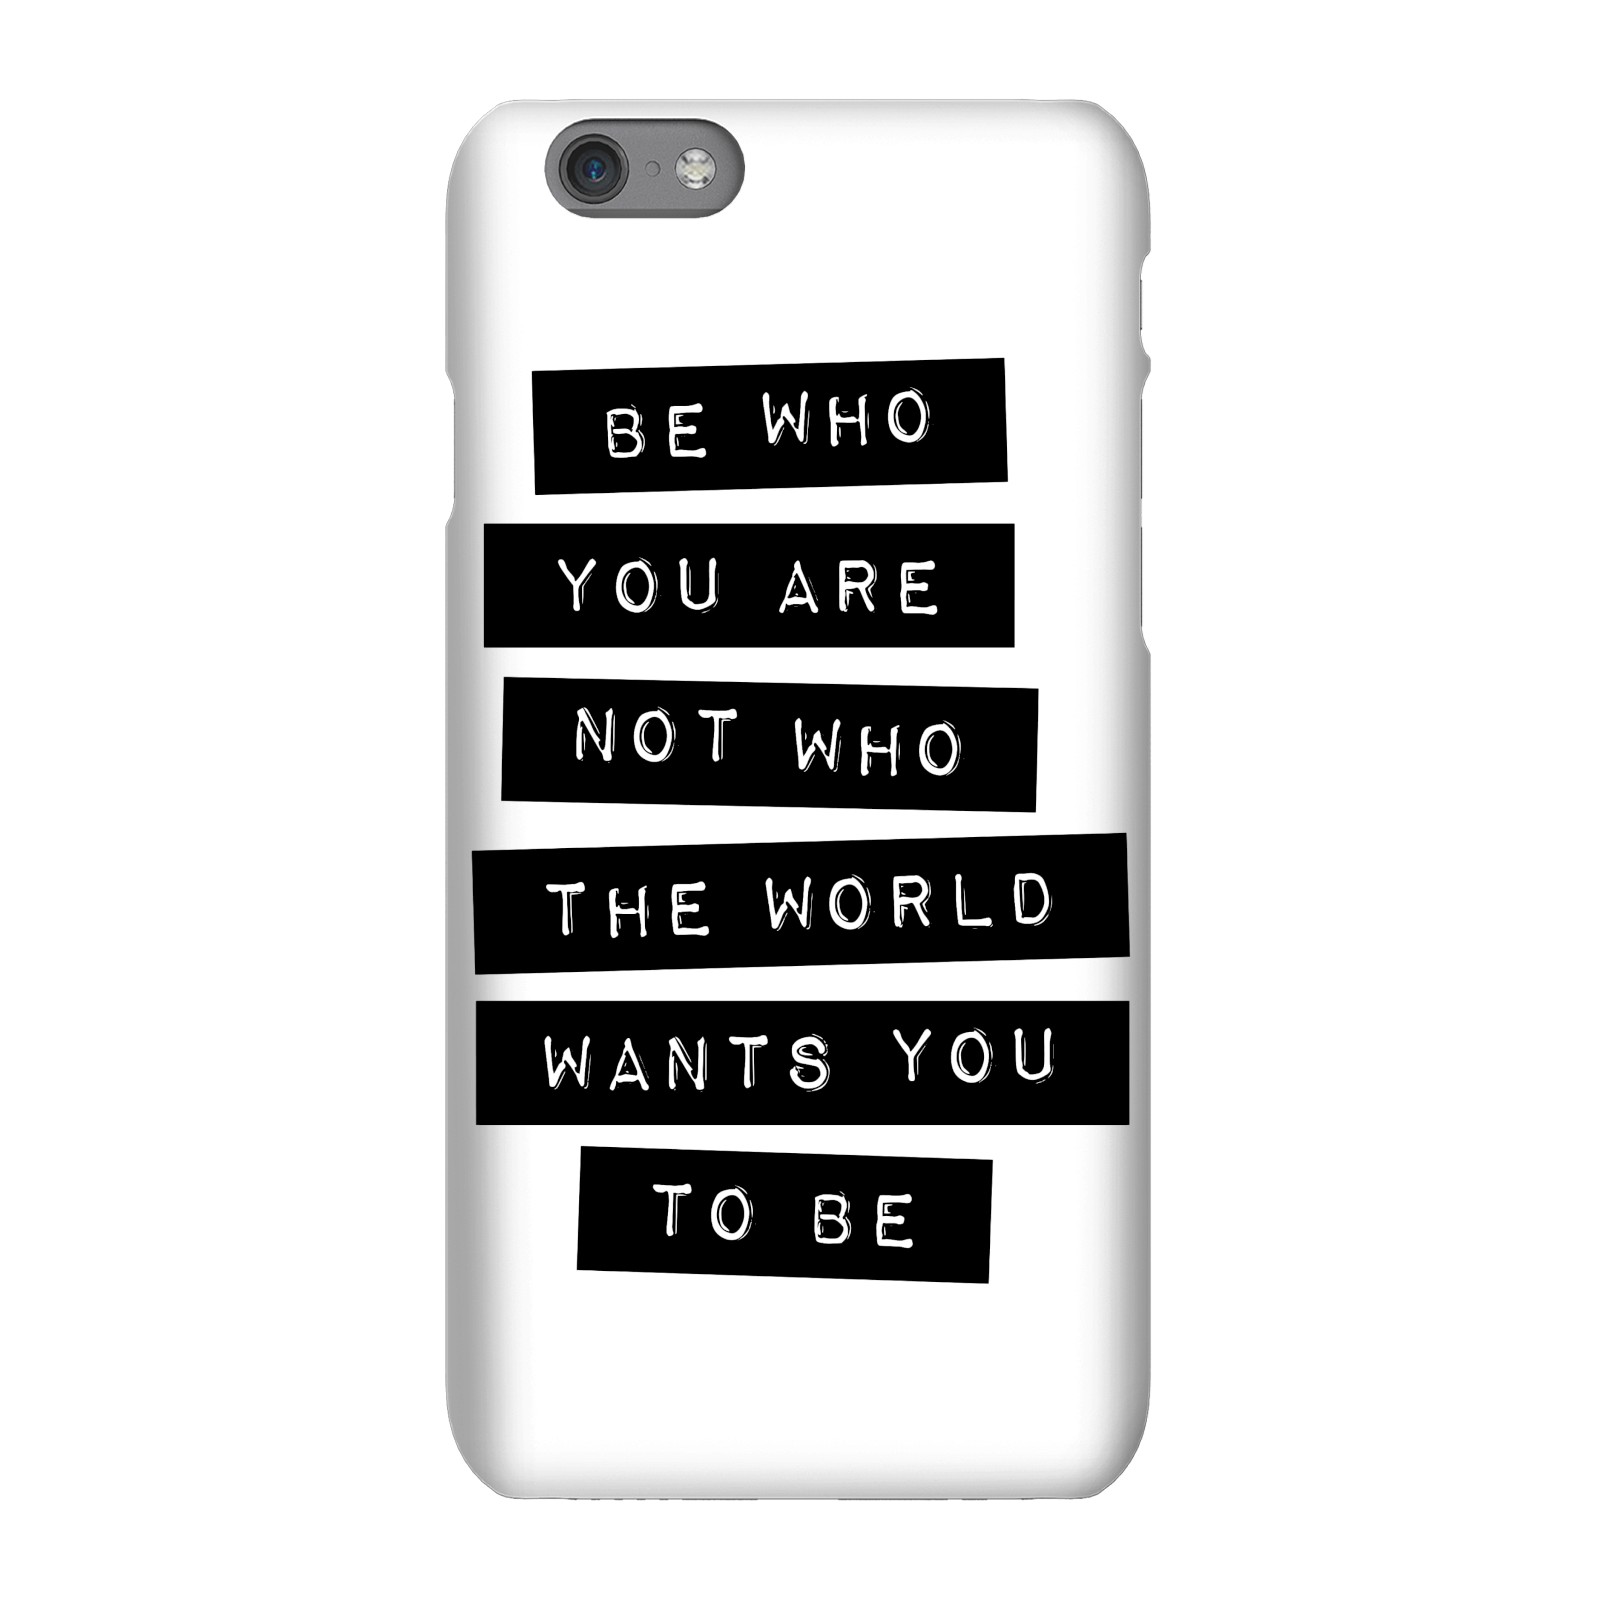 The Motivated Type Be Who You Are Not Who The World Wants You To Be Phone Case for iPhone and Android - iPhone 7 - Tough Case - Matte